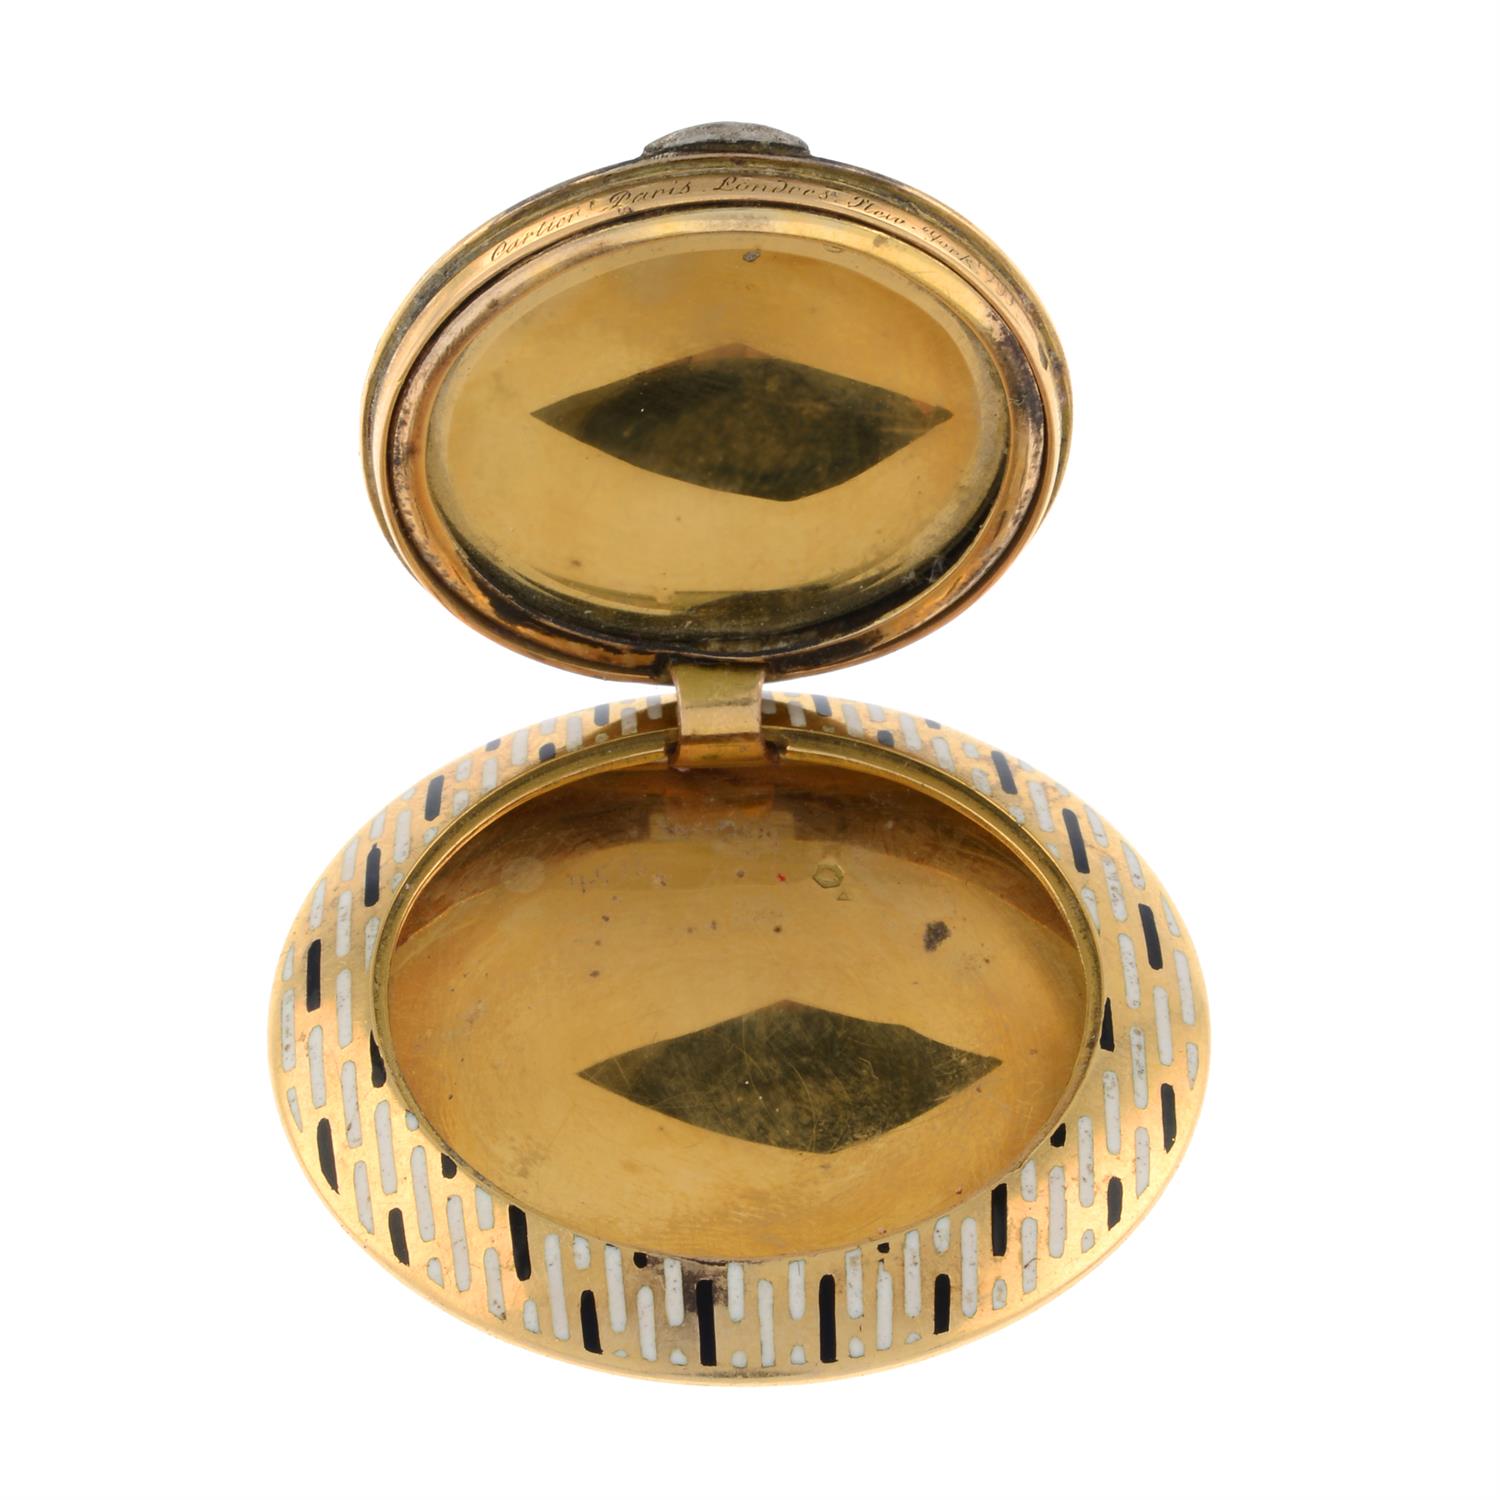 Mid 20th century gold enamel compact,. by Cartier - Image 3 of 4